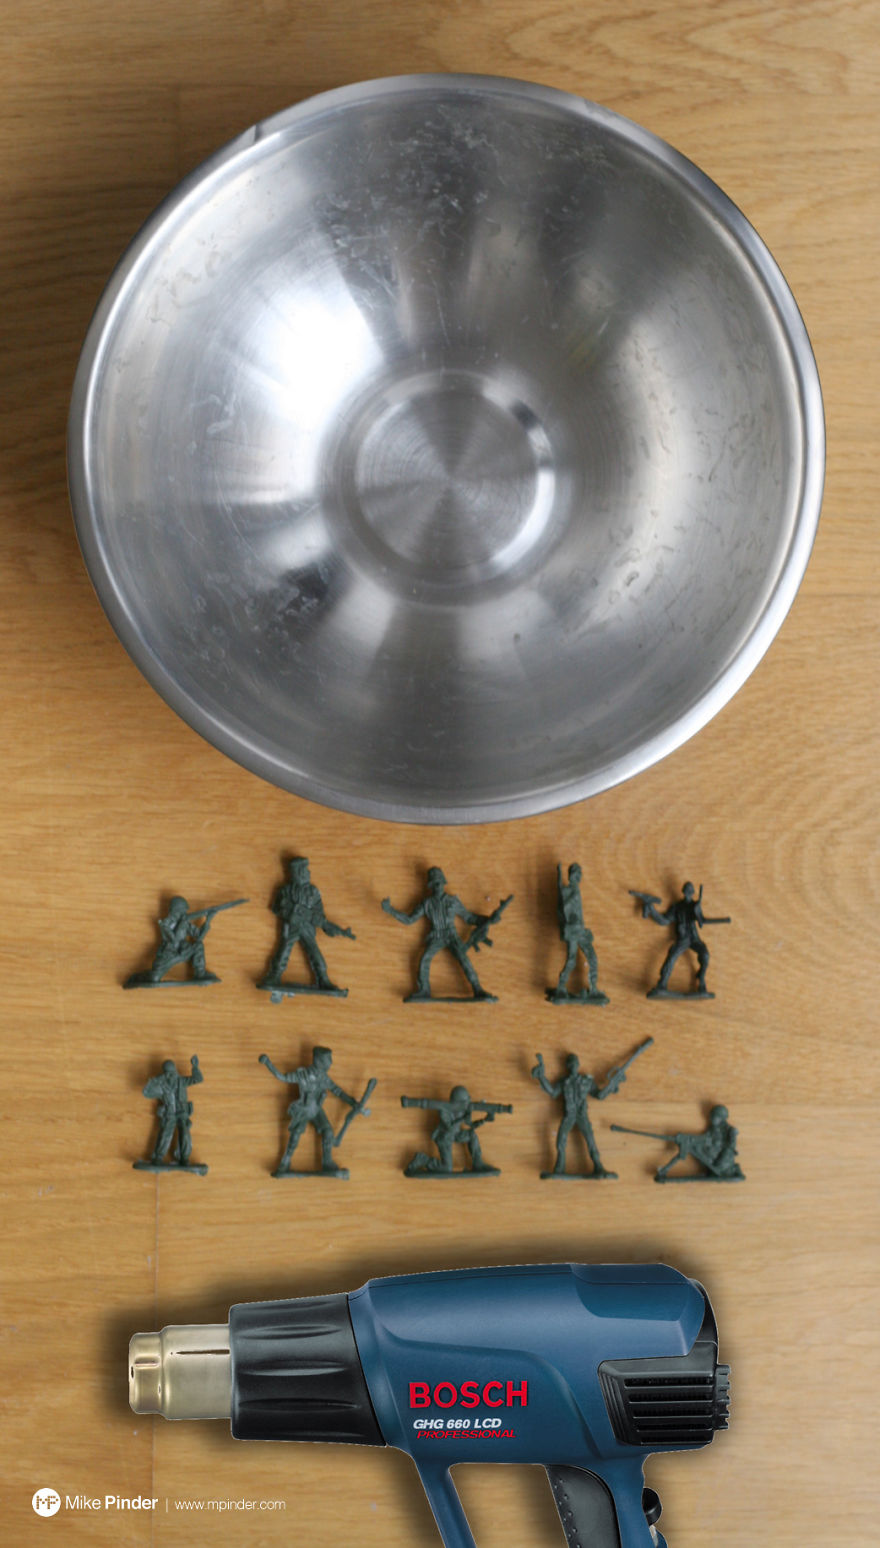 How To Make DIY Fruit Bowl Of Melted Plastic Army Men